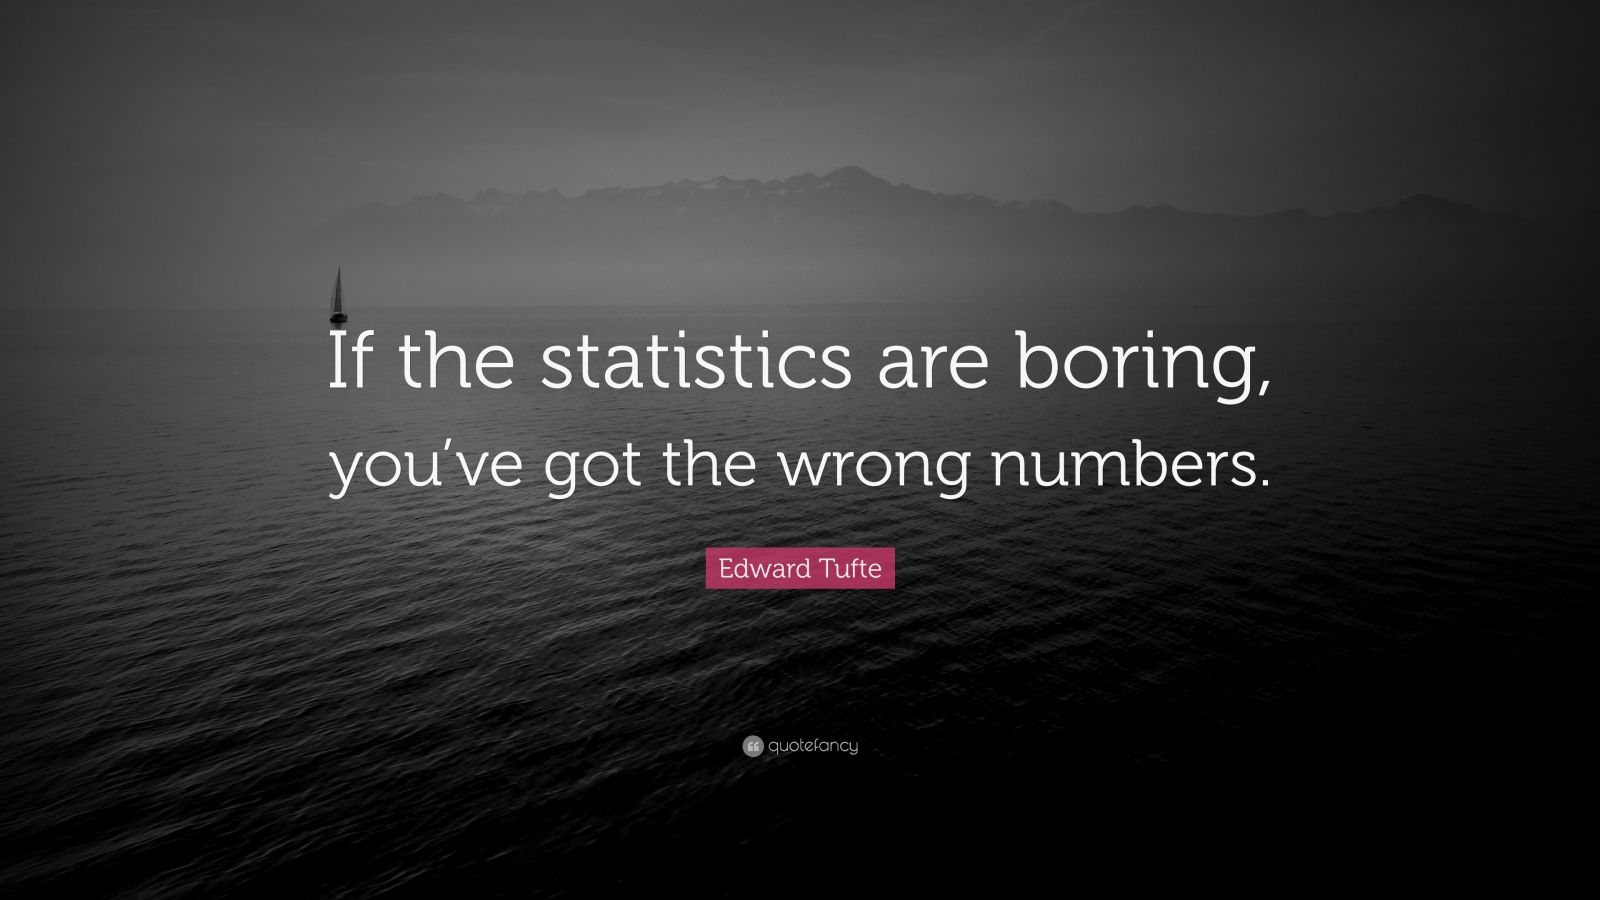 Edward Tufte Quote: “If the statistics are boring, you’ve got the wrong